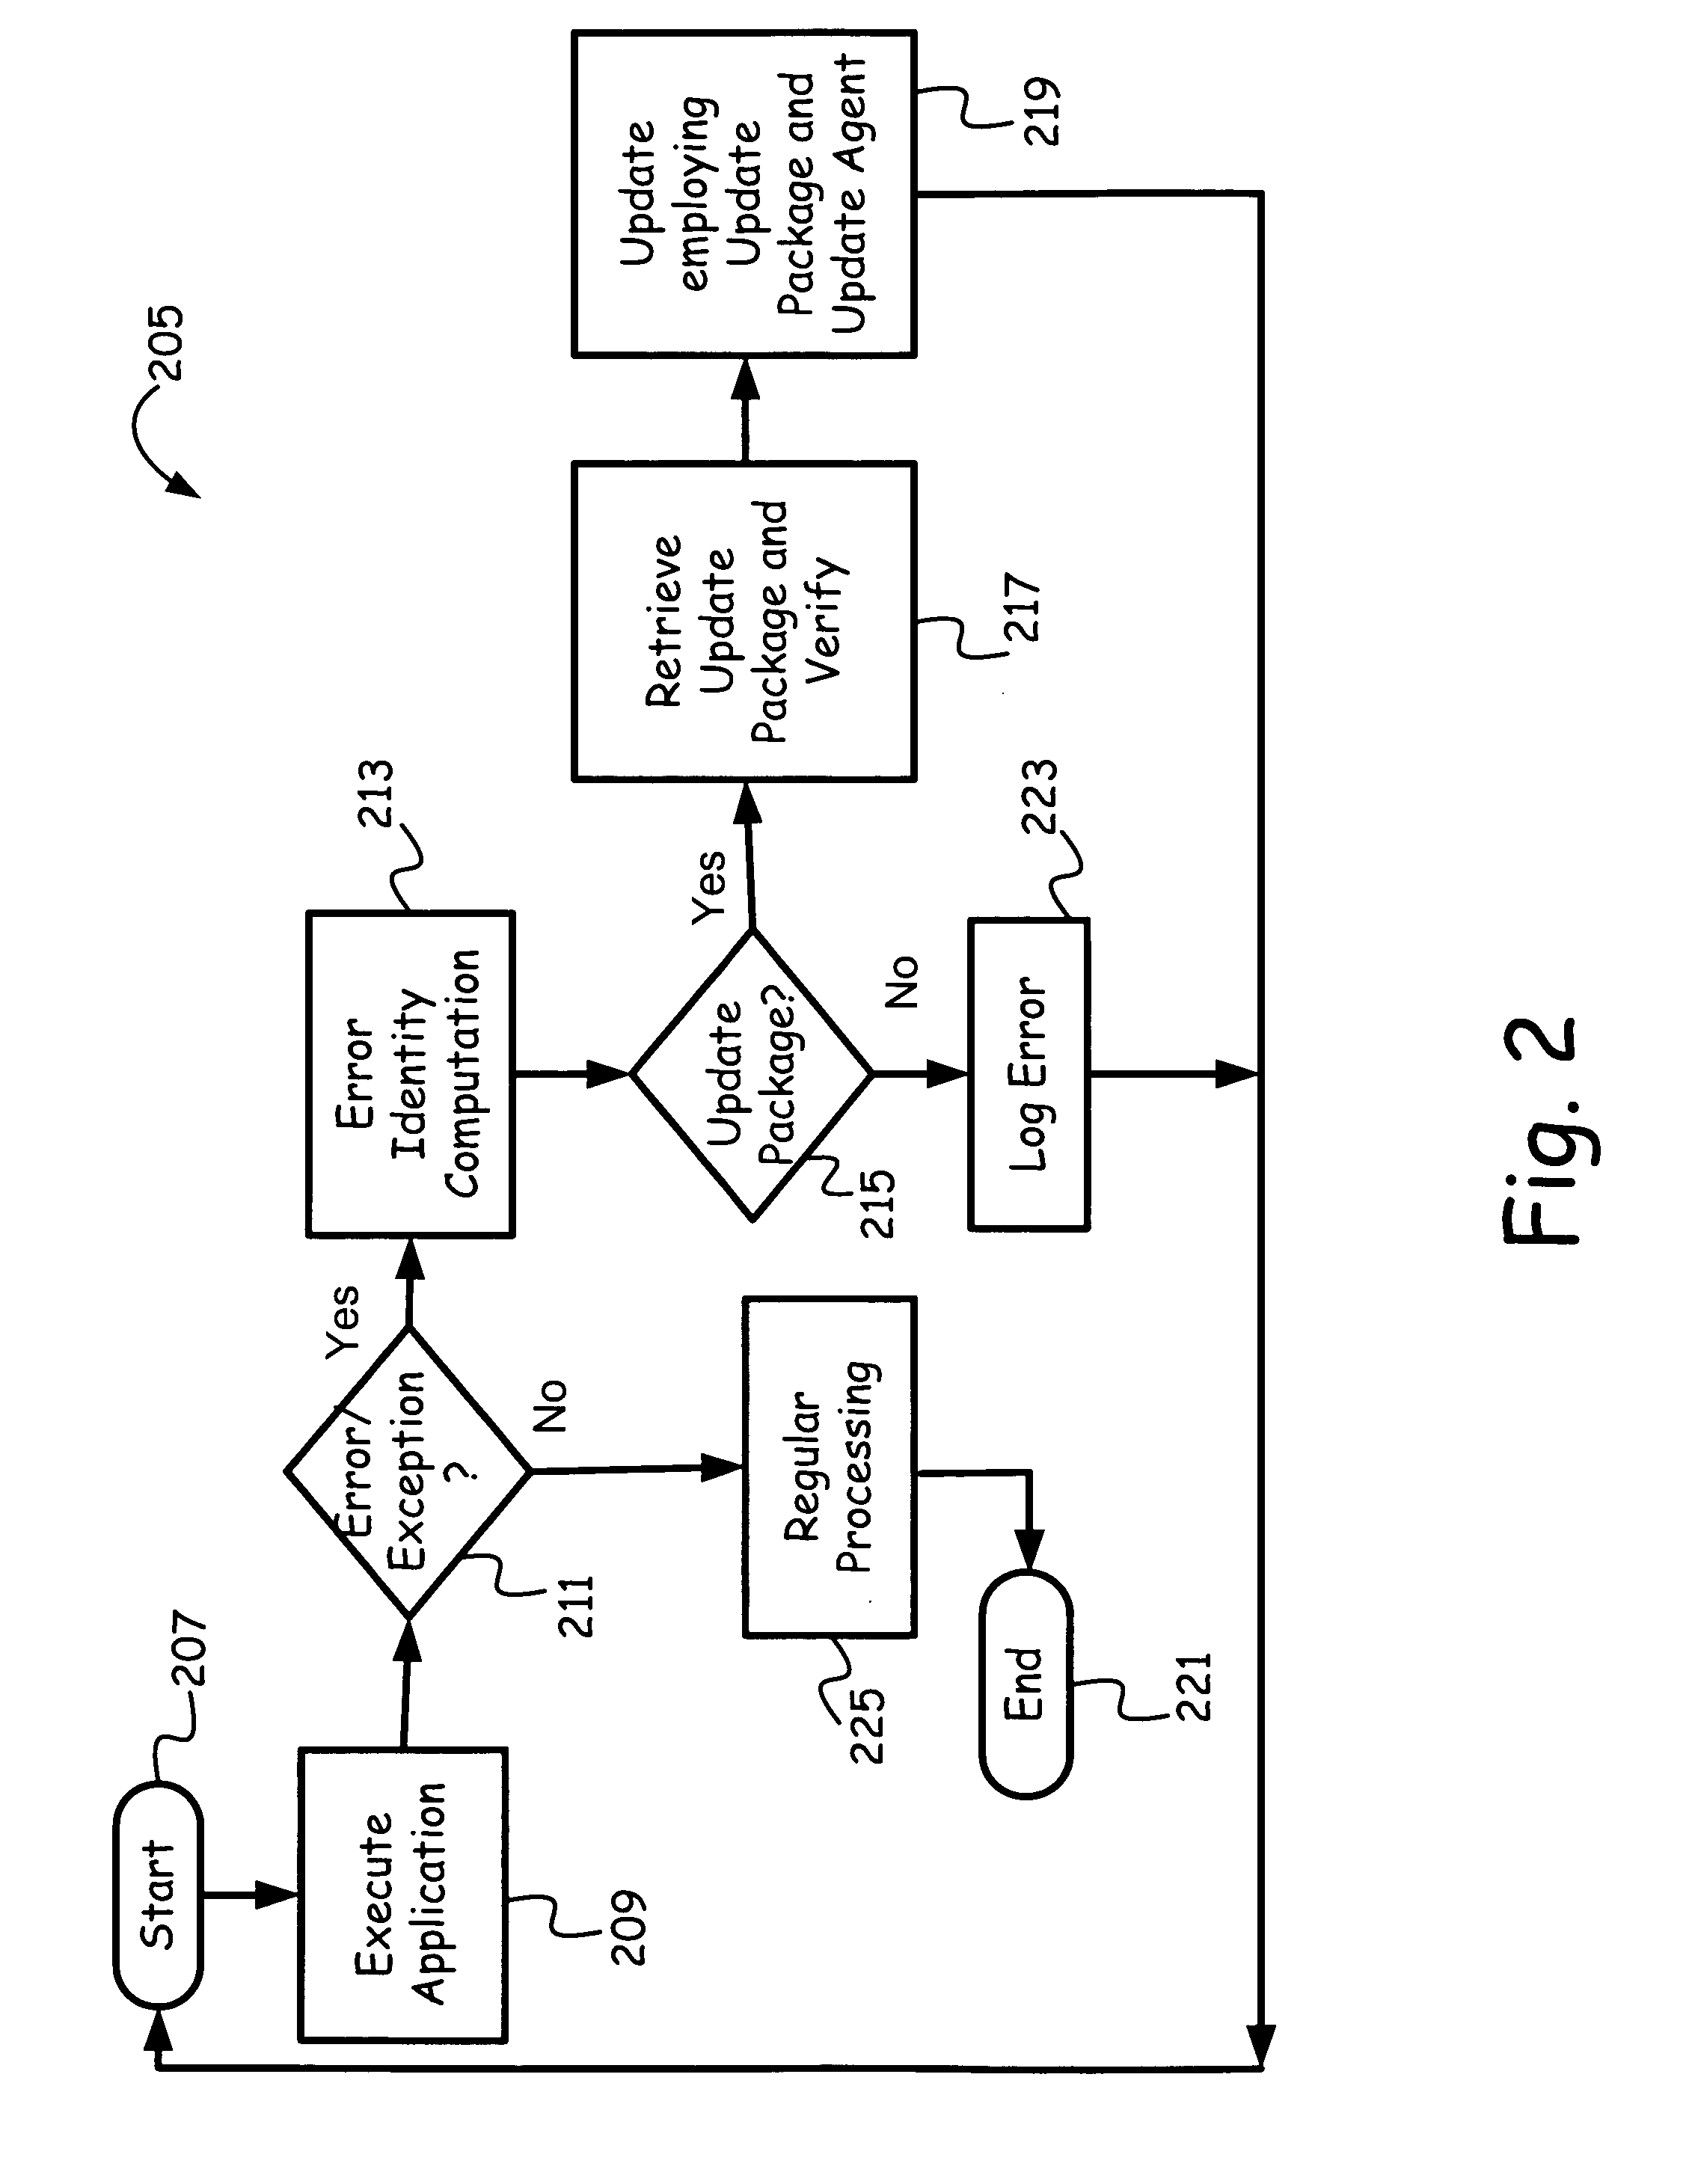 Software self-repair toolkit for electronic devices